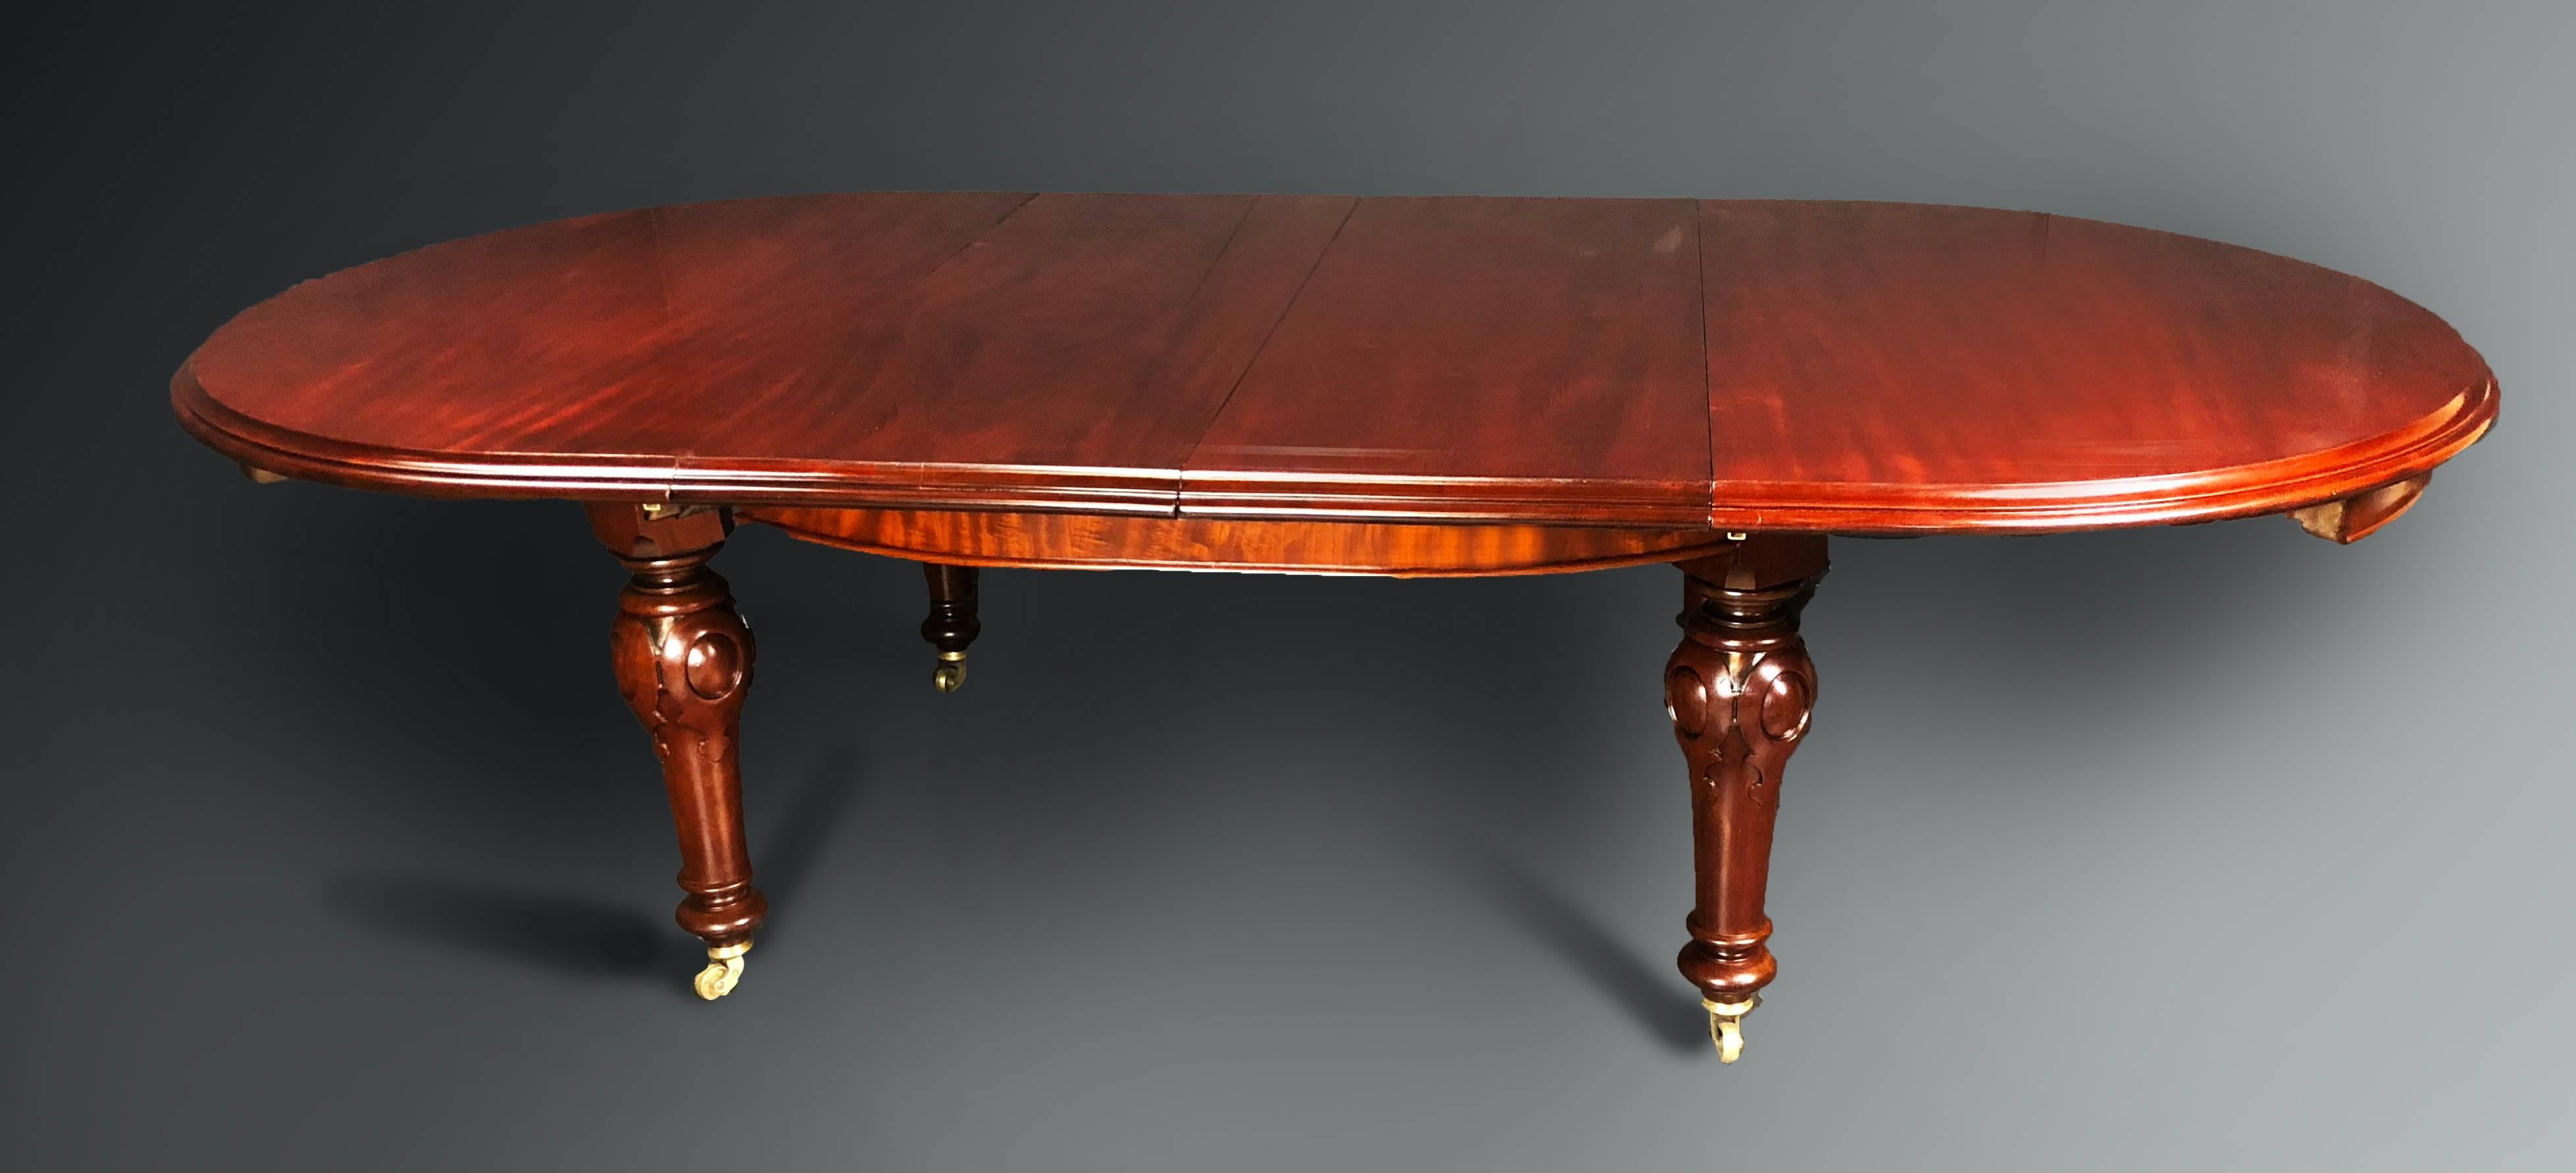 Joinery Large Dining Table Victorian Era with Easy Extension System Solid Mahogany